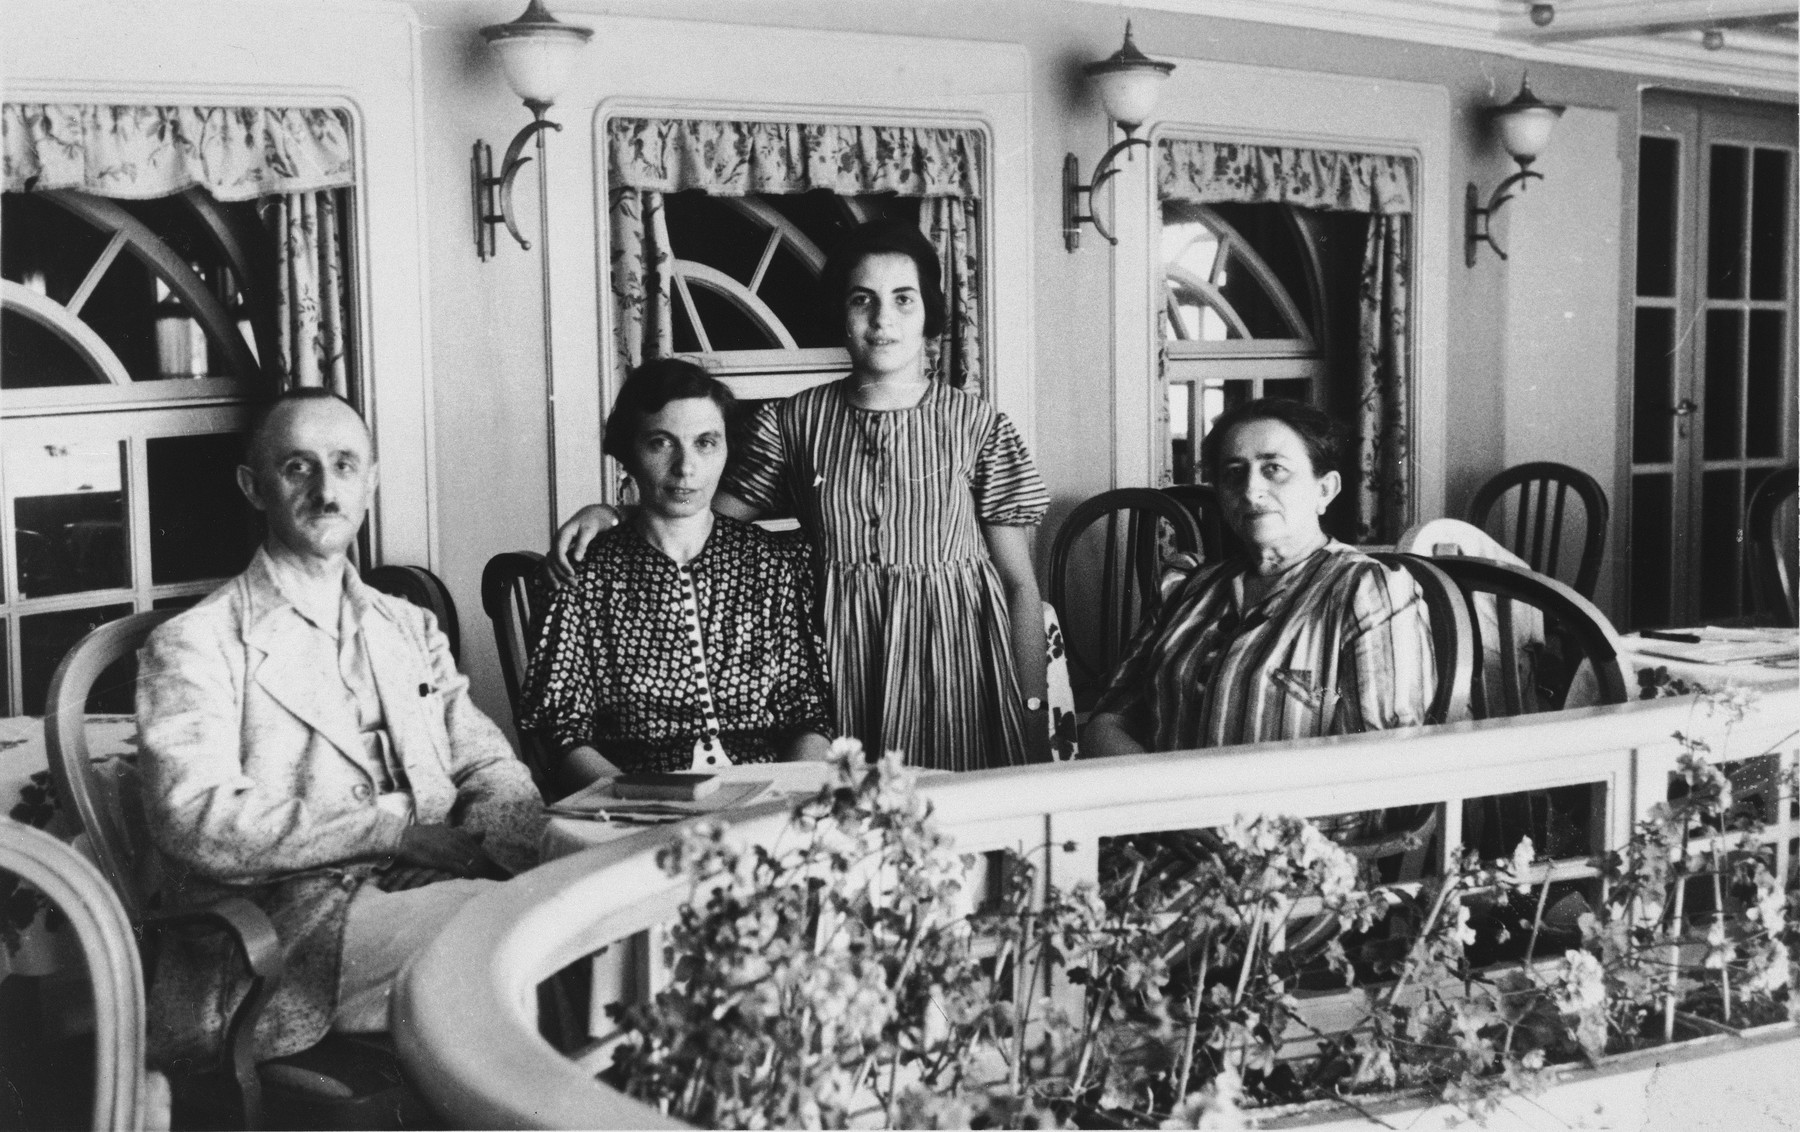 The Arndt family sits on deck of the St. Louis.

Pictured from left to right are Arthur Arndt, Hertha Arndt, Lieselotte Arndt, and Paula Kahnemann.